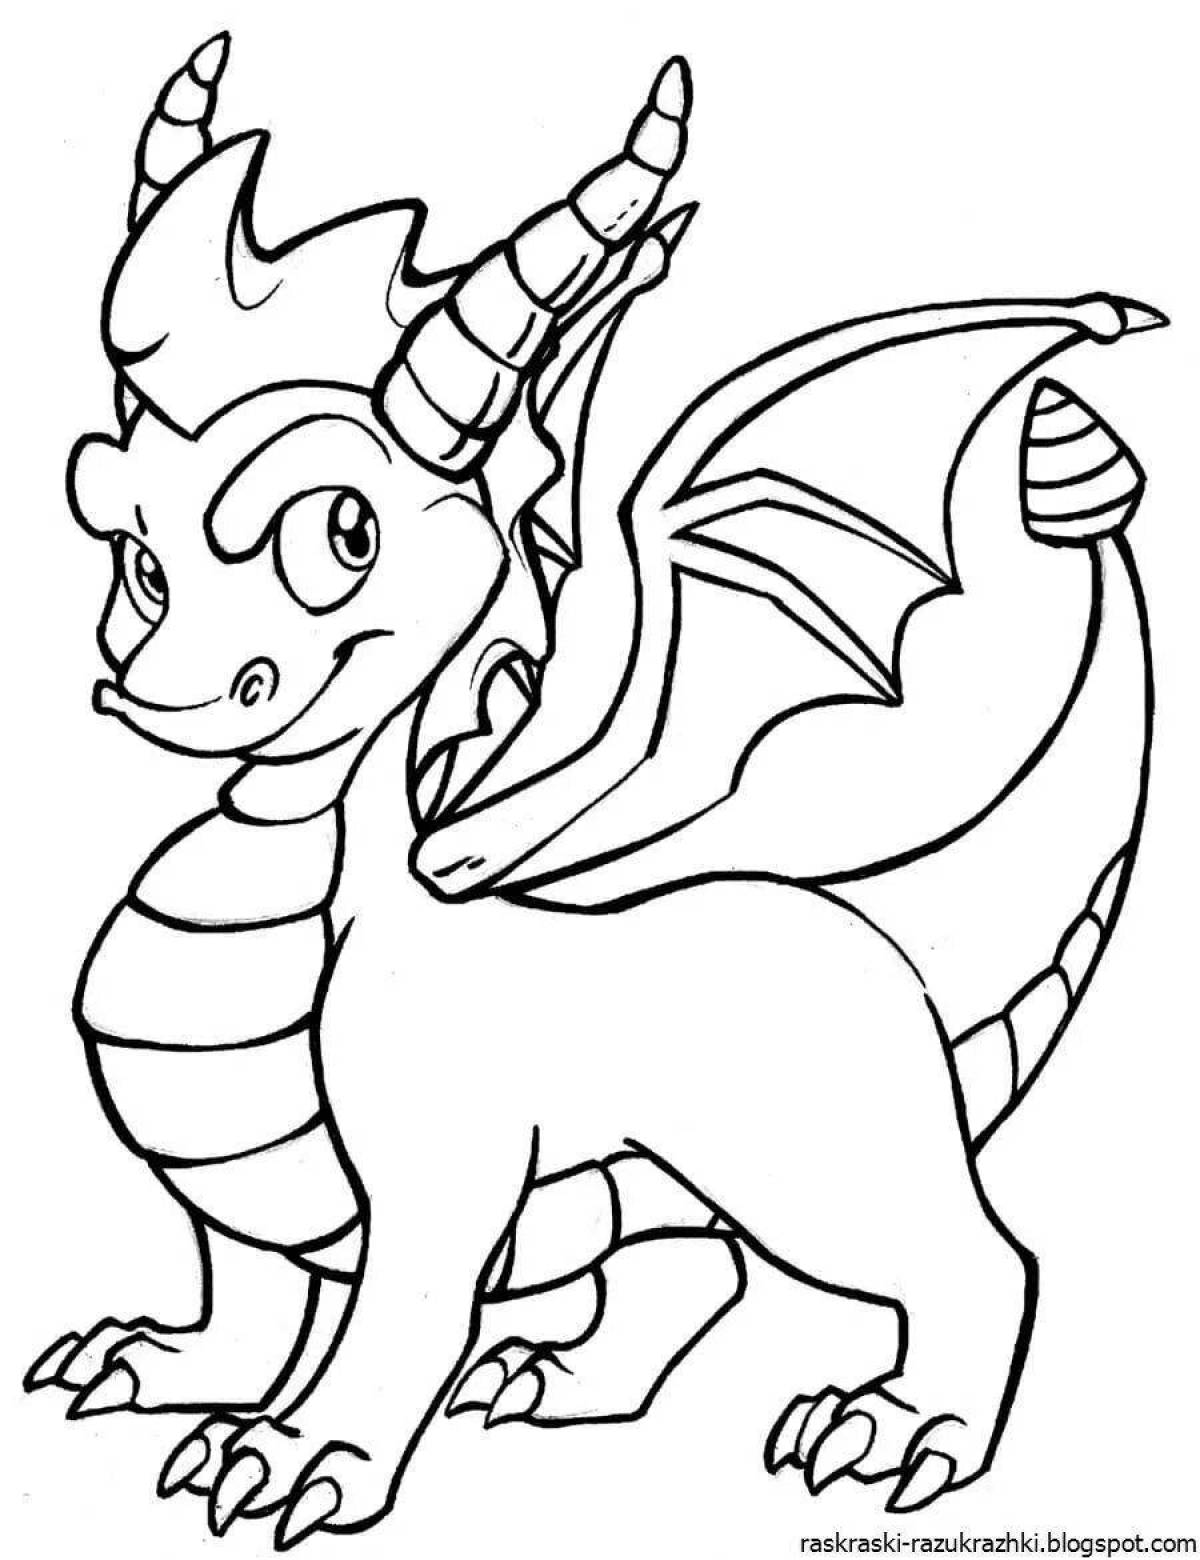 Great dragon coloring pages for boys